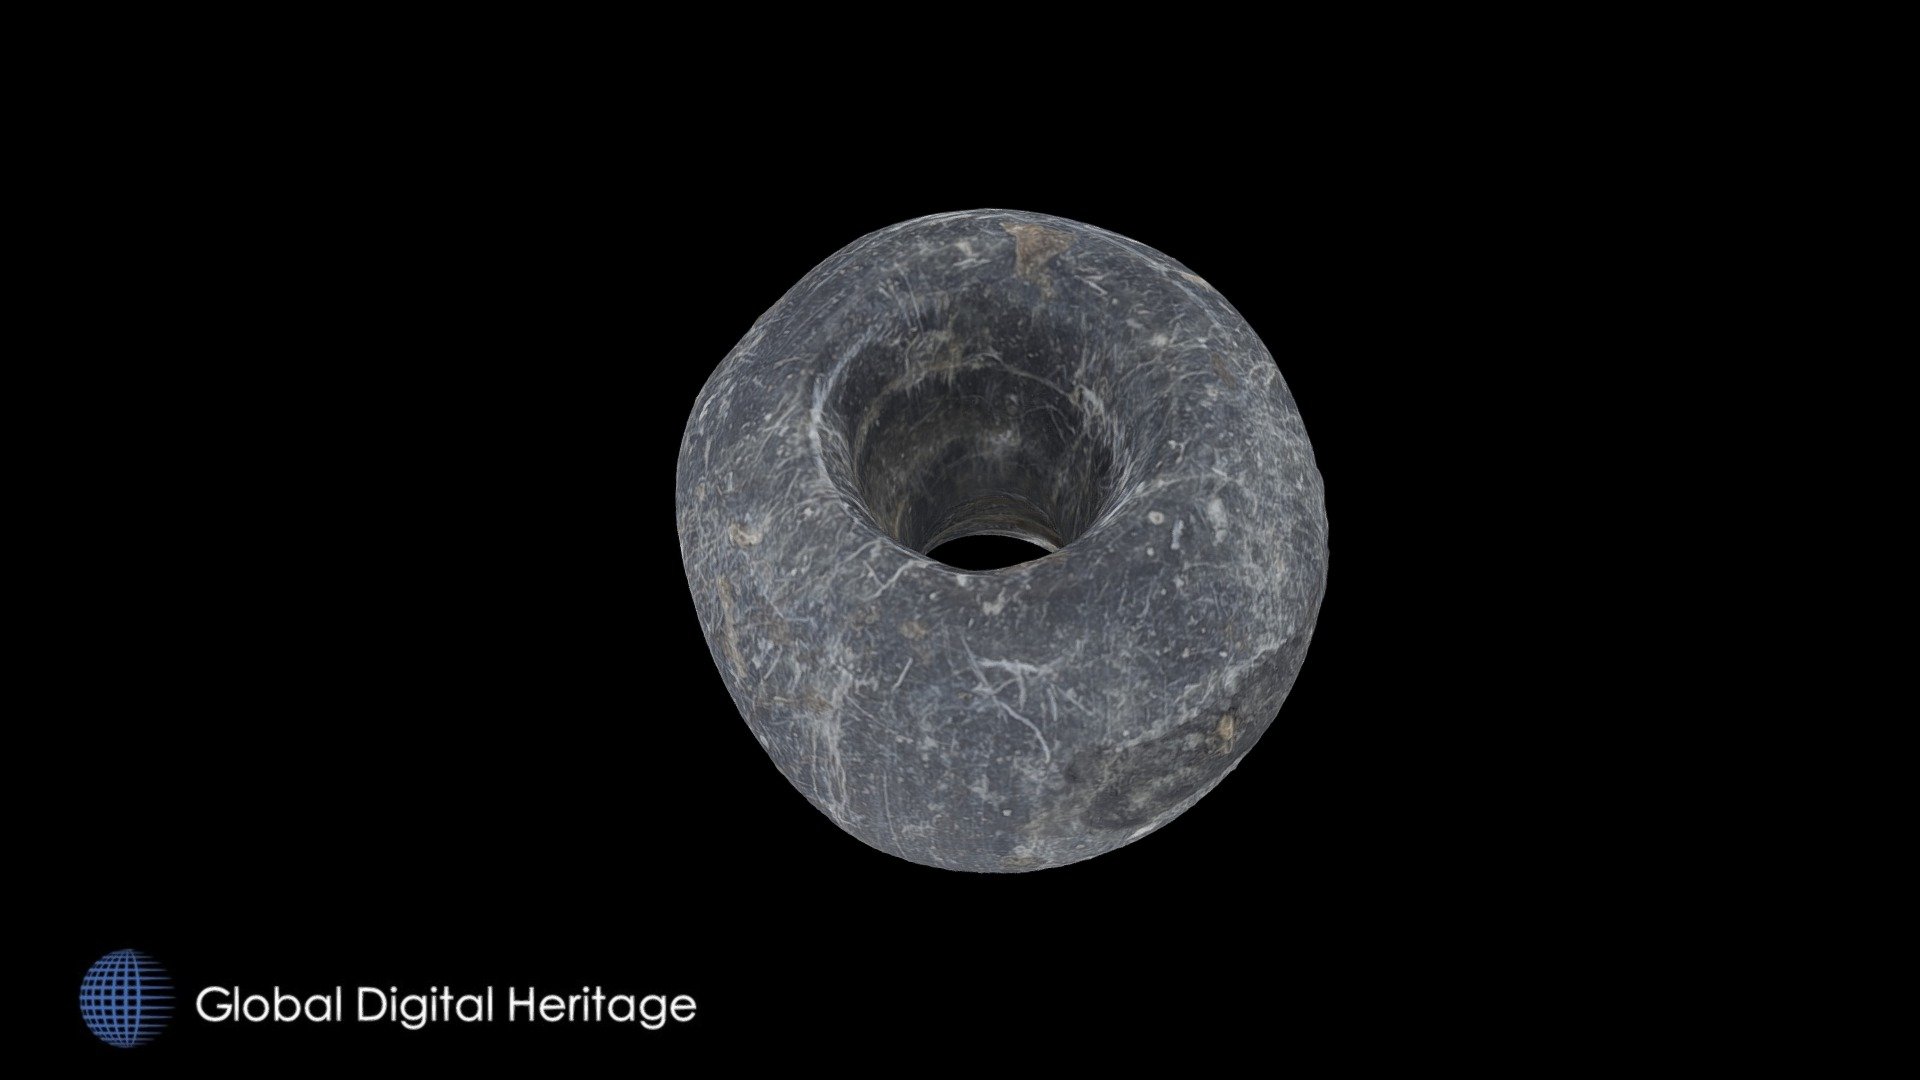 Neolithic Necklace Bead, Escoural Cave, Portugal